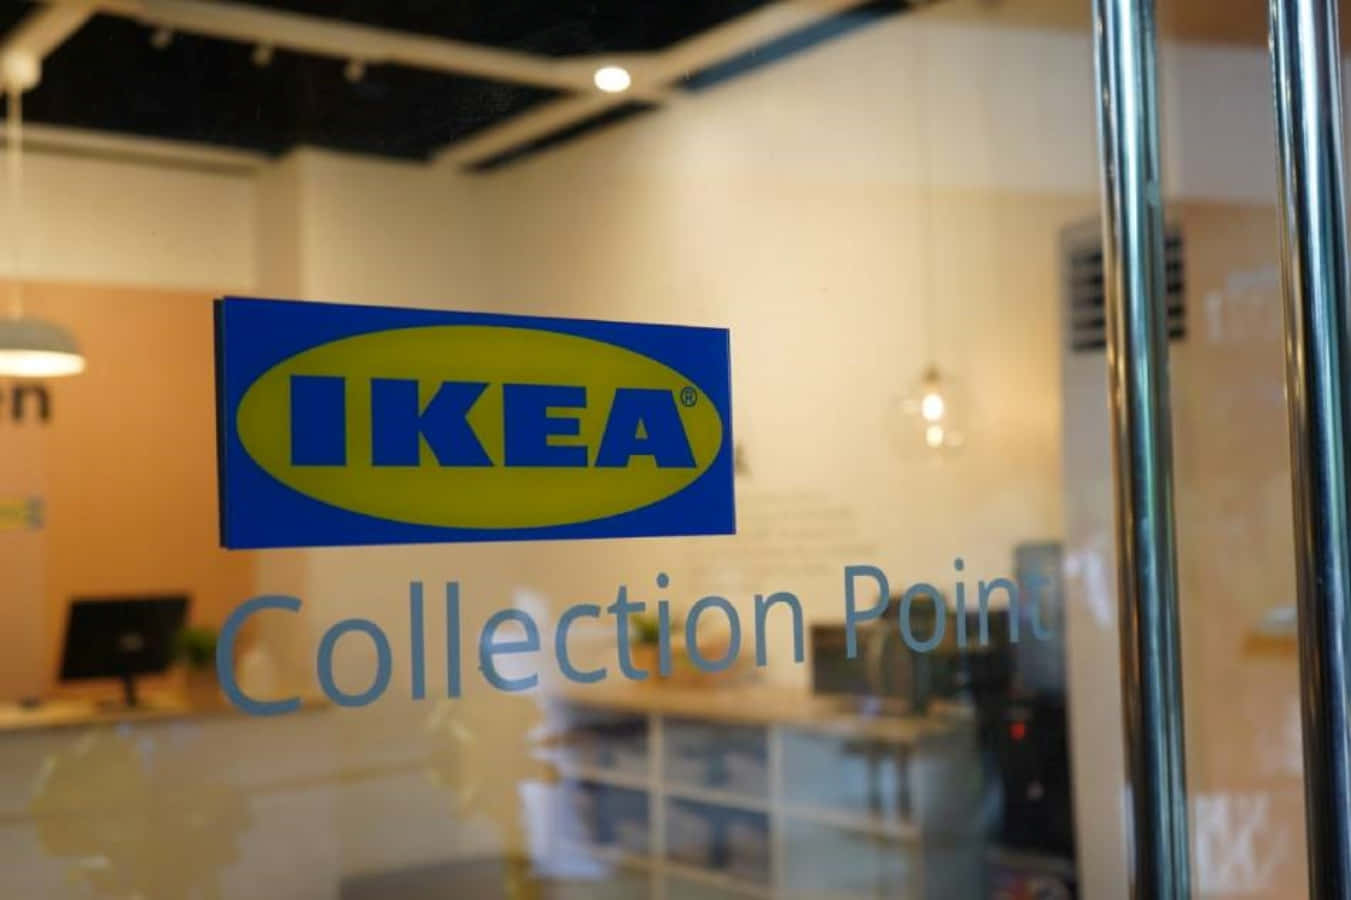 Ikea Collection Point Logo On The Glass Door